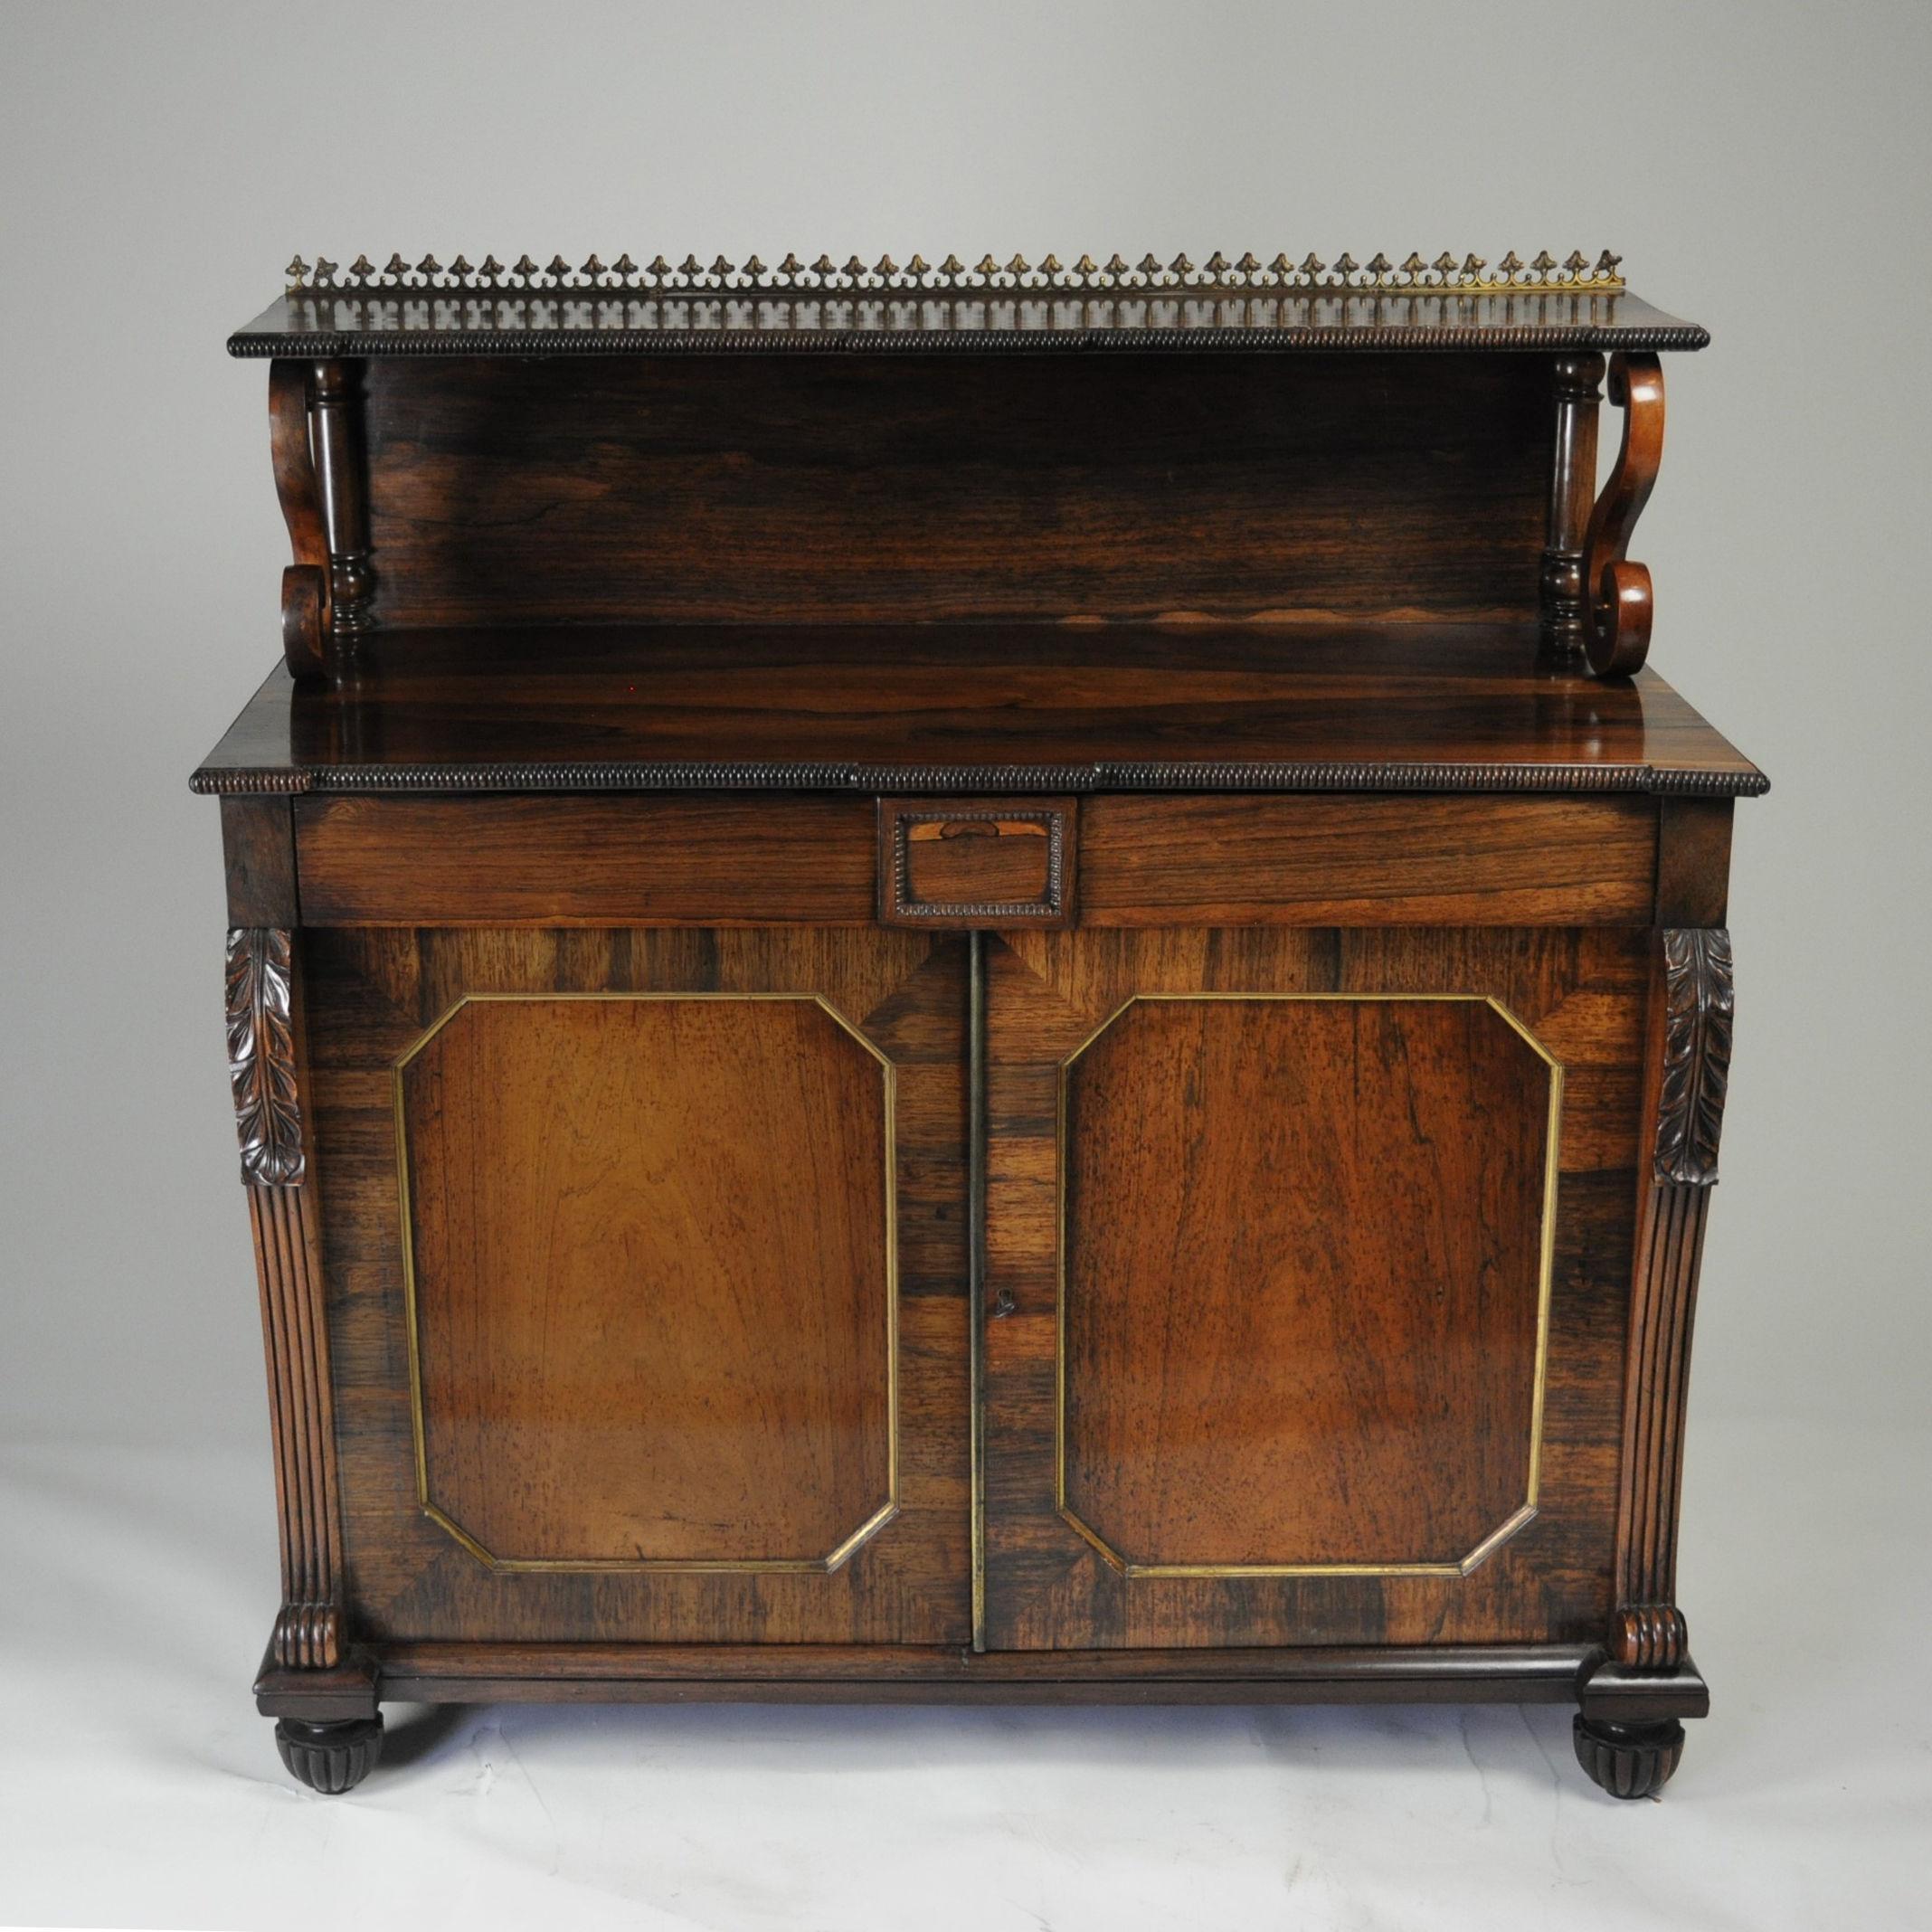 A good quality early 19th century Regency period rosewood Chiffonier, the beaded edge, galleried superstructure raised on 'S' scrolled supports above the top with matching beaded decoration and a single long drawer above a pair of brass-edged